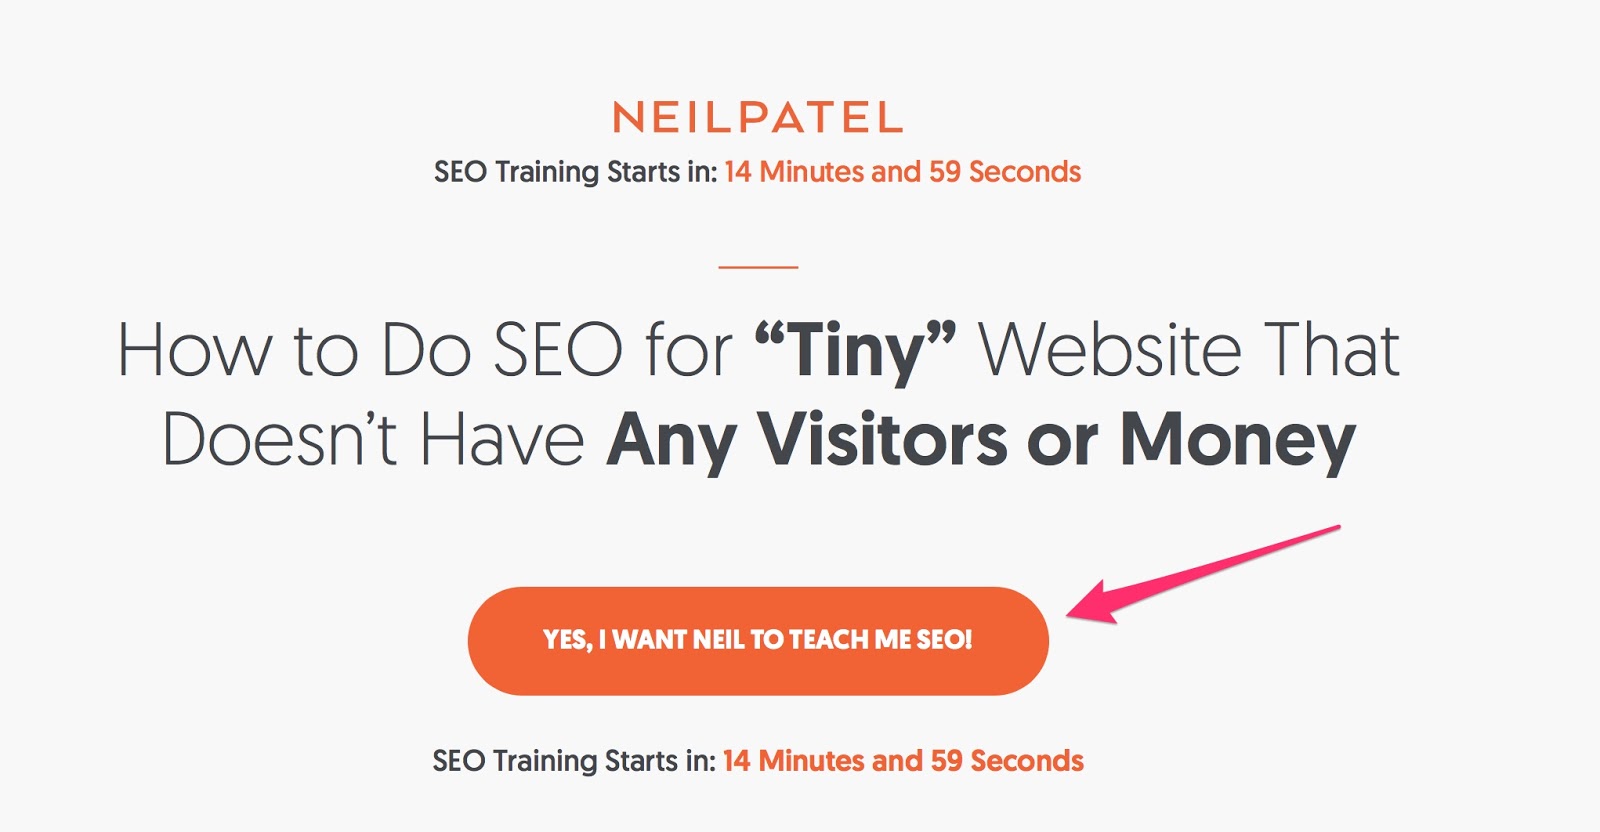 Neil Patel Helping You Succeed Through Online Marketing 